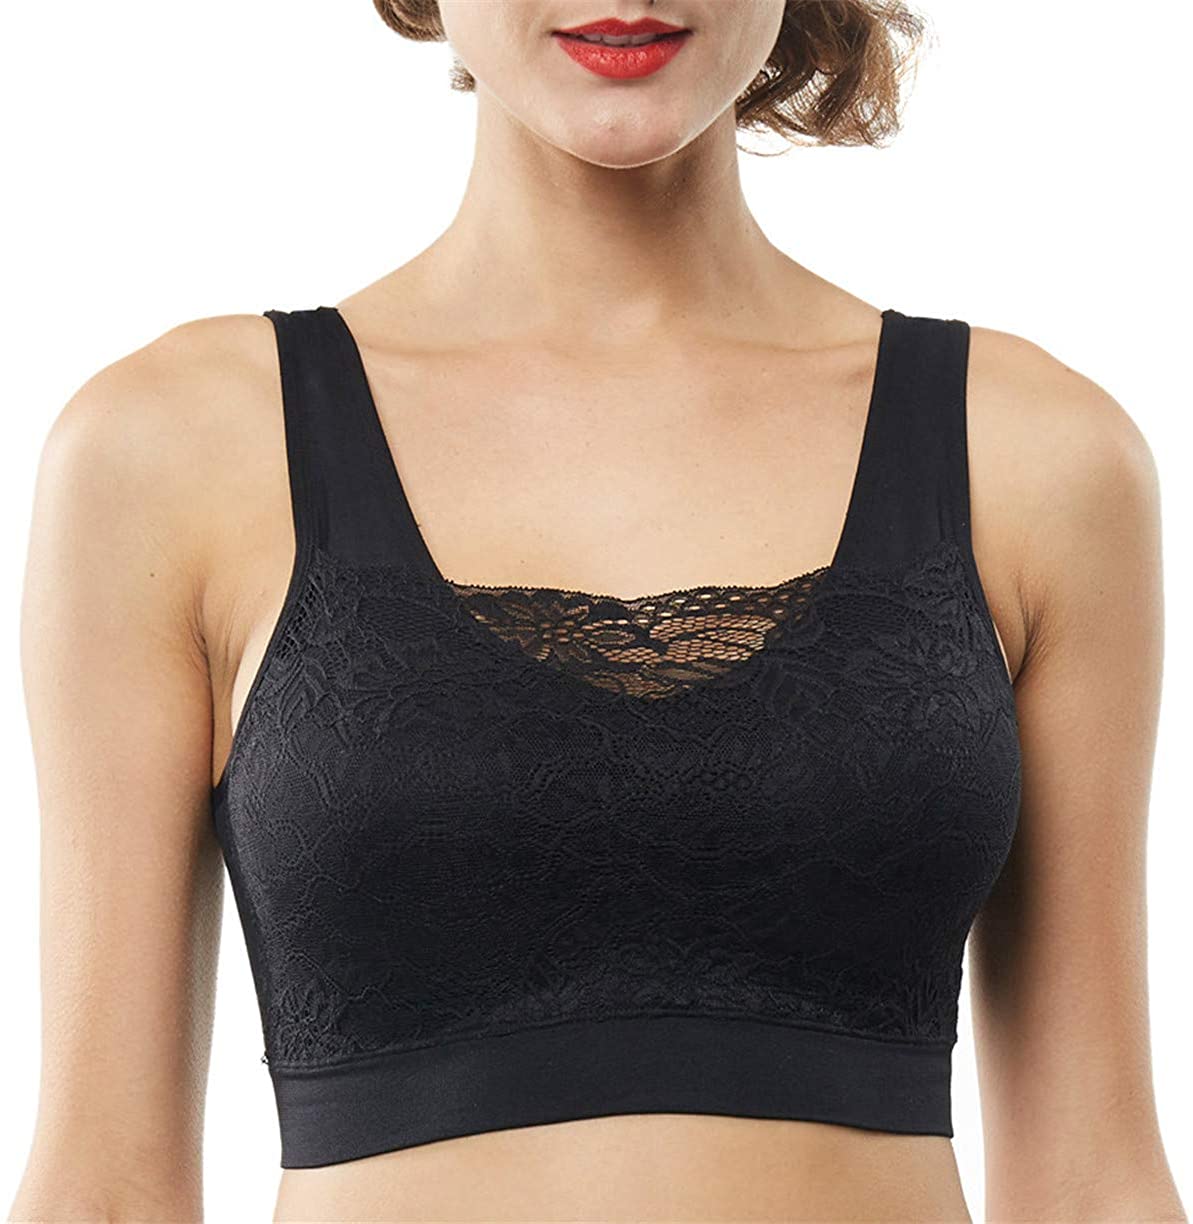 KHAYA Women's Sport Lace Bra Tank Top Removeable Pad Full Coverage Cami Sexy Bralette